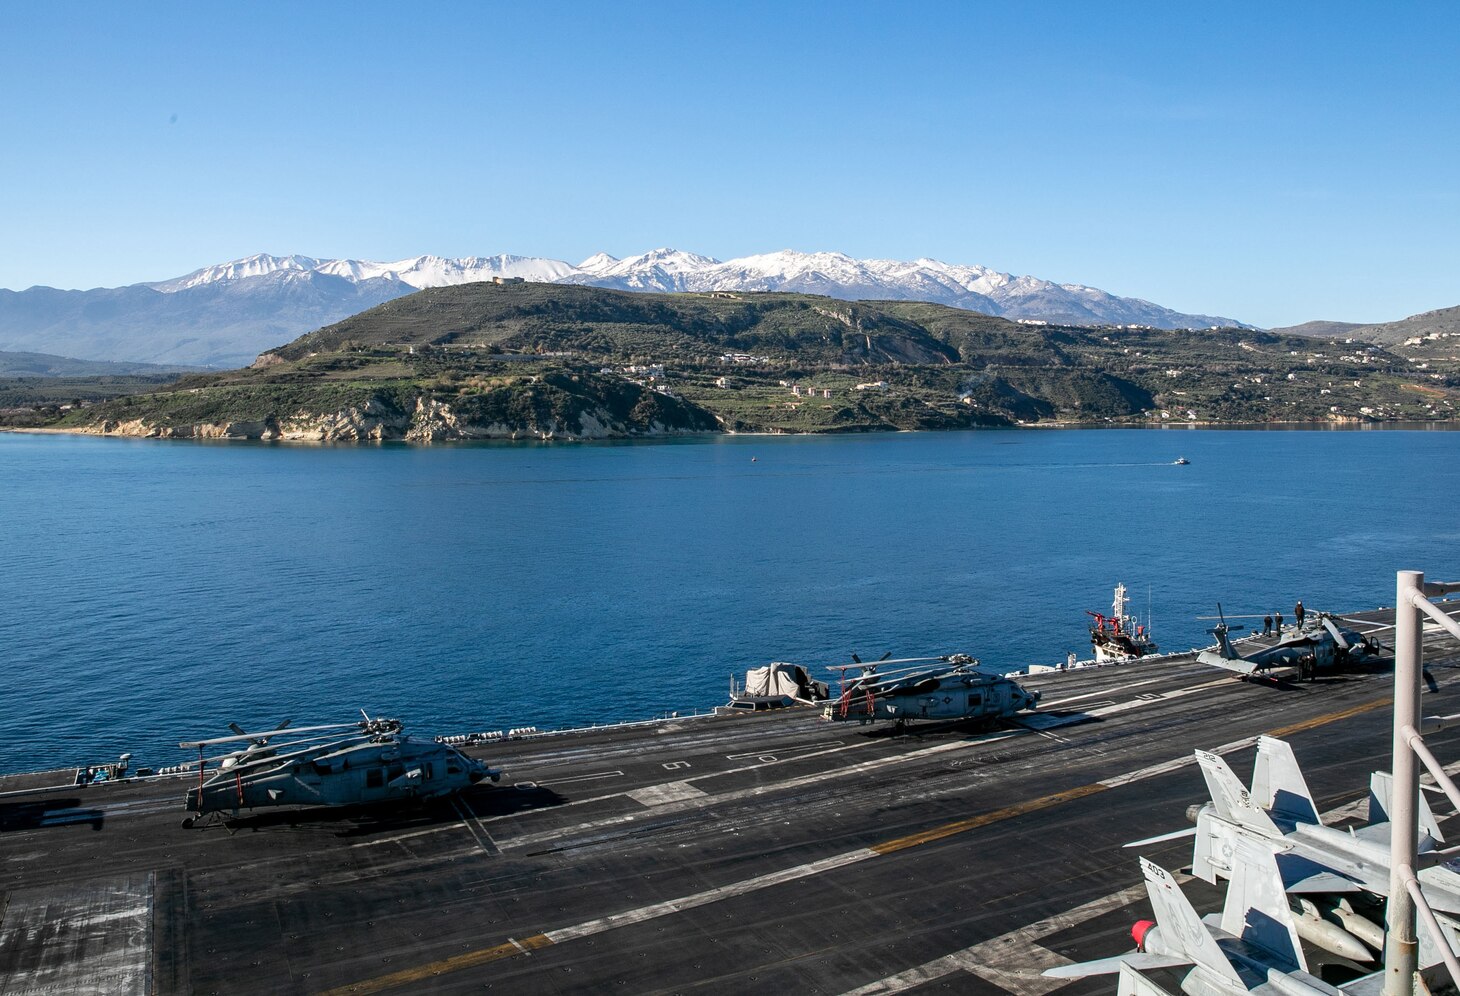 (March 10, 2023) The Nimitz-class aircraft carrier USS George H.W. Bush (CVN 77), along with the embarked staff of Carrier Strike Group (CSG) 10, arrives in Souda Bay, Crete, for a scheduled port visit March 10, 2023. The George H.W. Bush CSG is on a scheduled deployment in the U.S. Naval Forces Europe area of operations, employed by U.S. Sixth Fleet to defend U.S., allied, and partner interests.